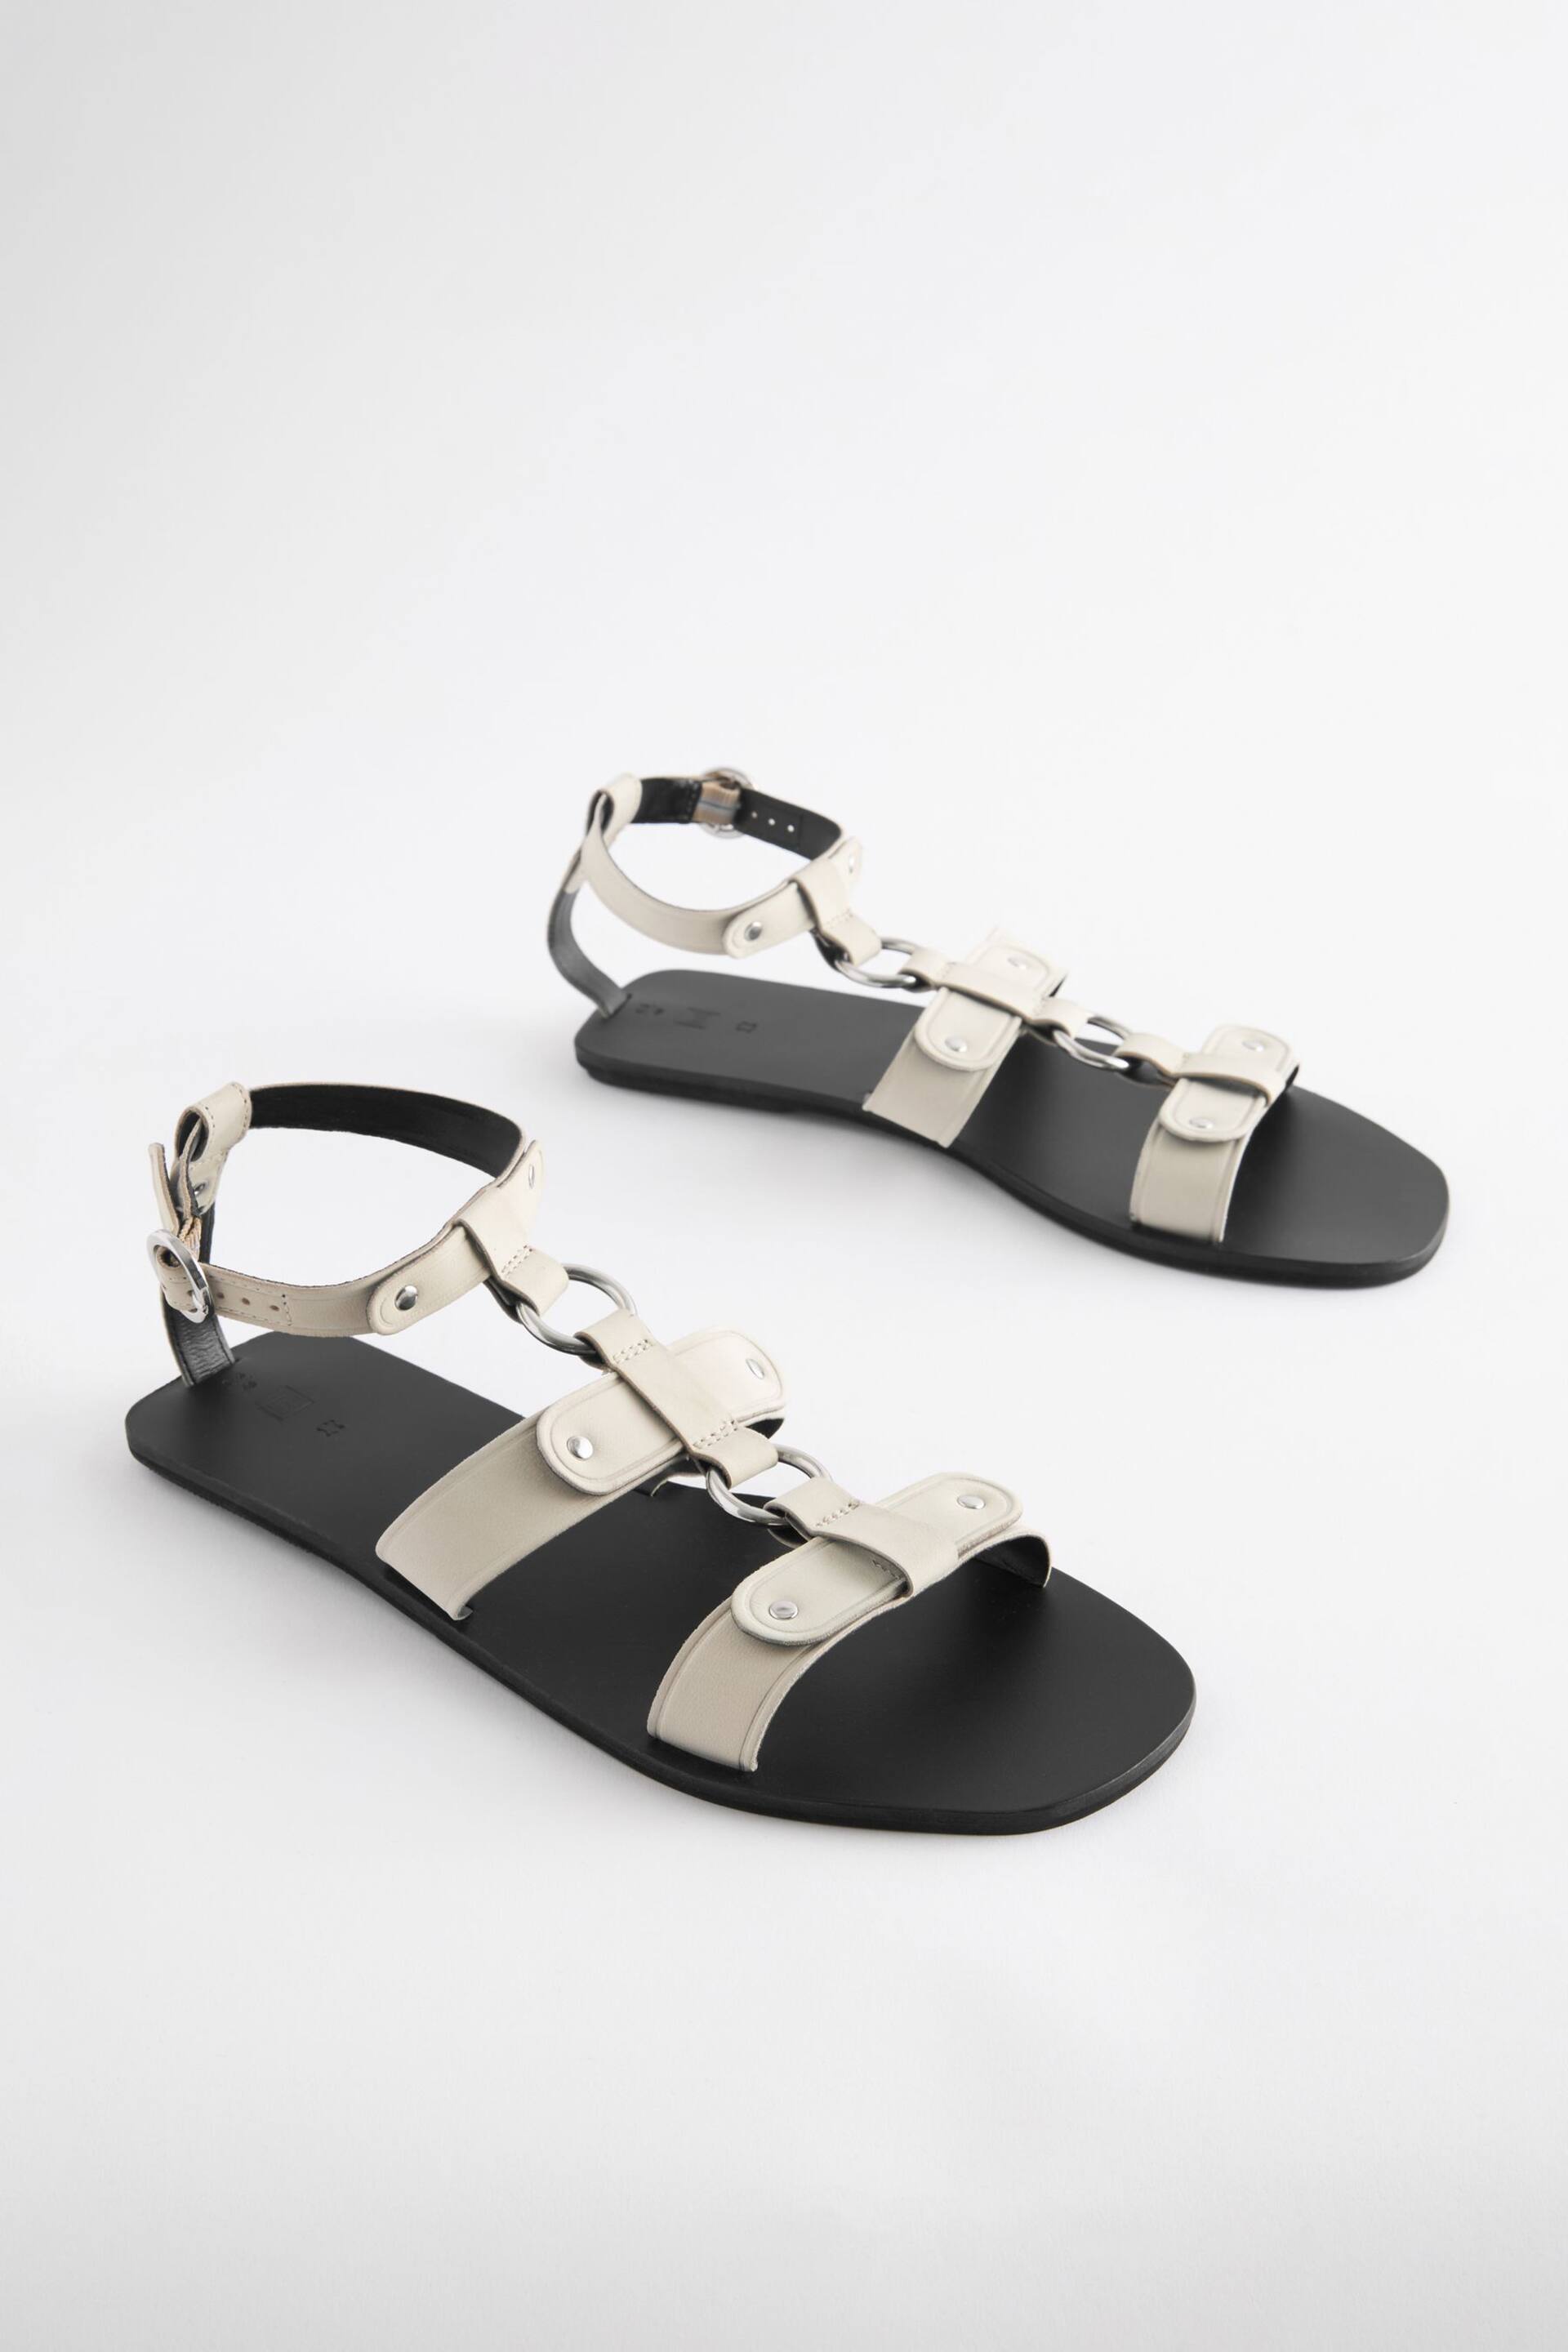 Bone Leather Ring Detail Sandals - Image 1 of 5